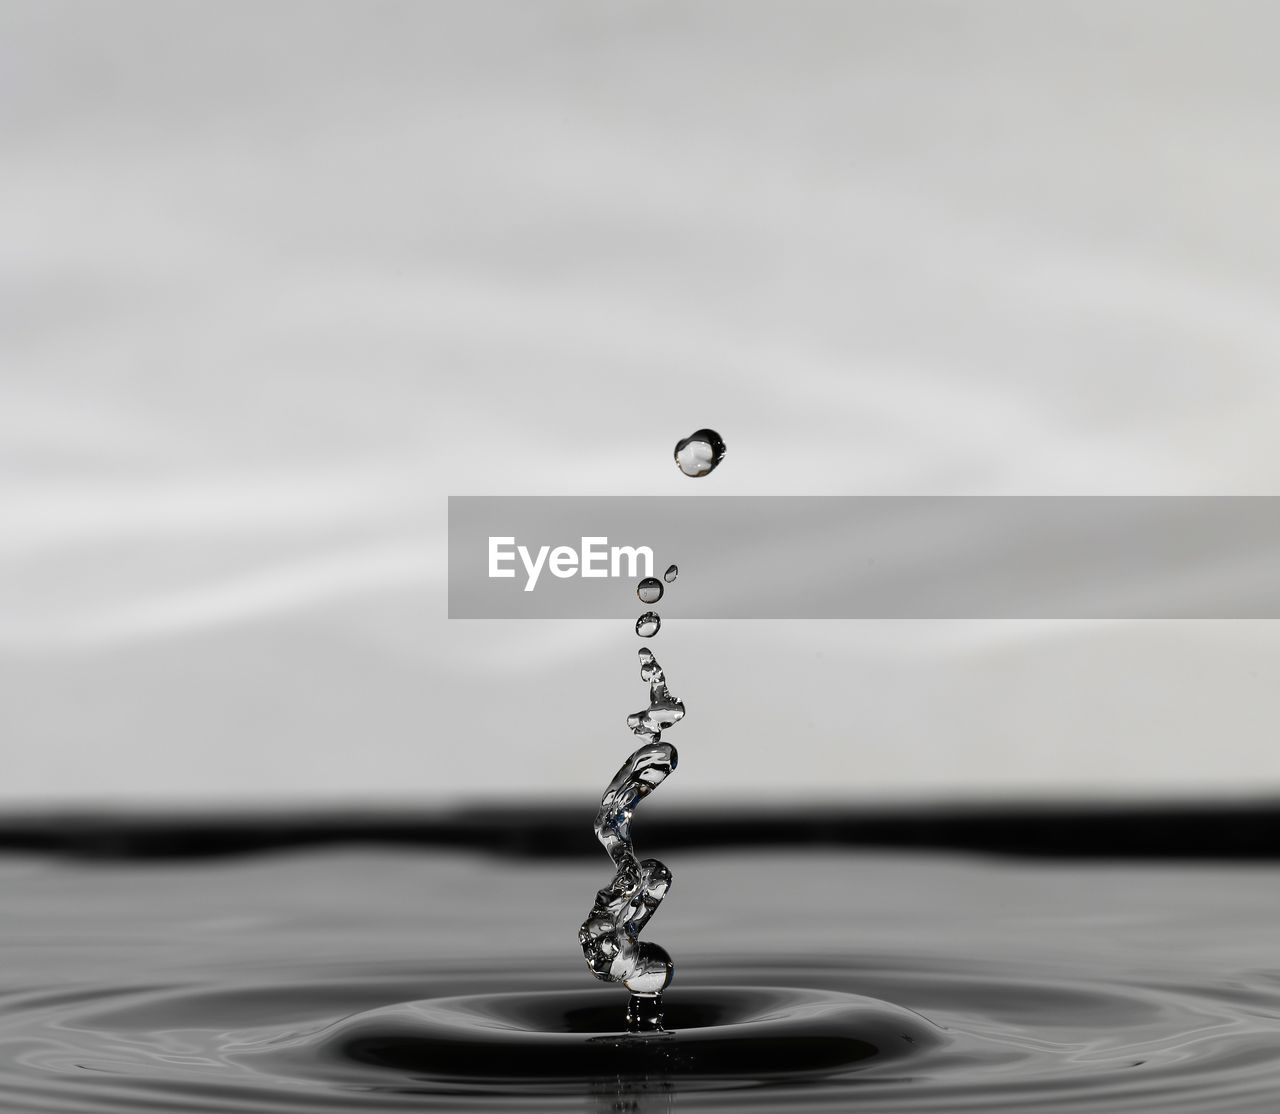 CLOSE-UP OF DROP FALLING ON WATER AGAINST BLURRED BACKGROUND